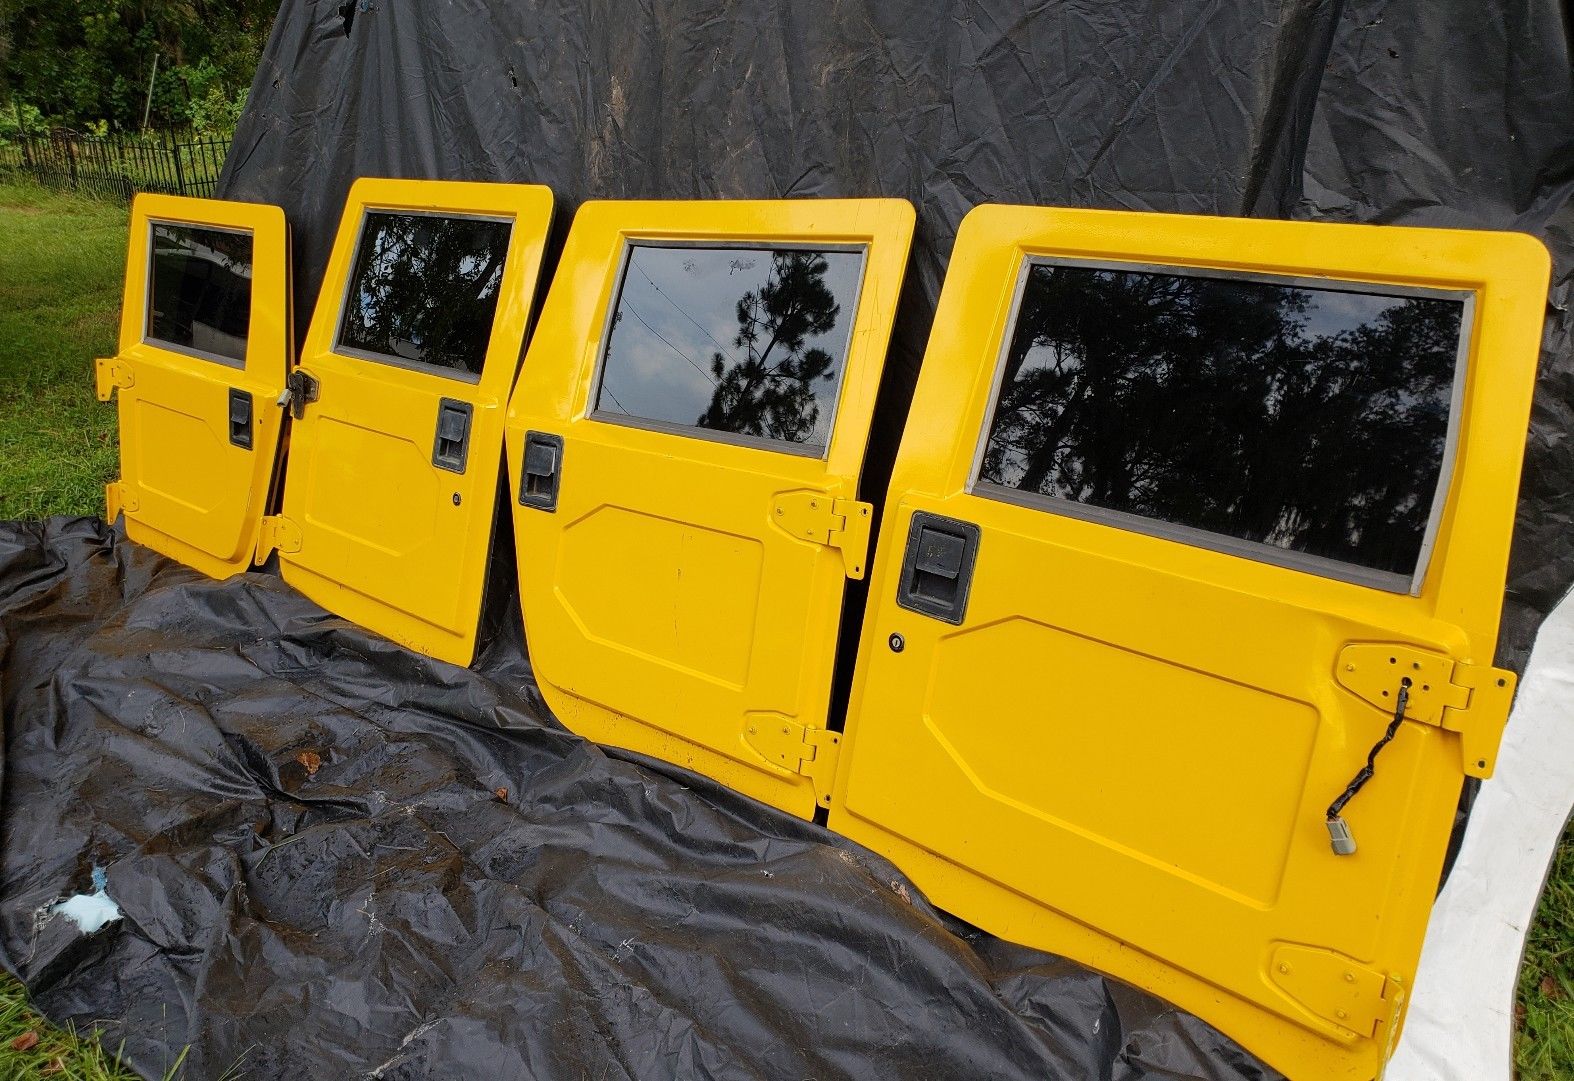 Hummer H1 doors hmmwv humvee 2022 2023 is in stock and for sale - Price &  Review 2022 2023